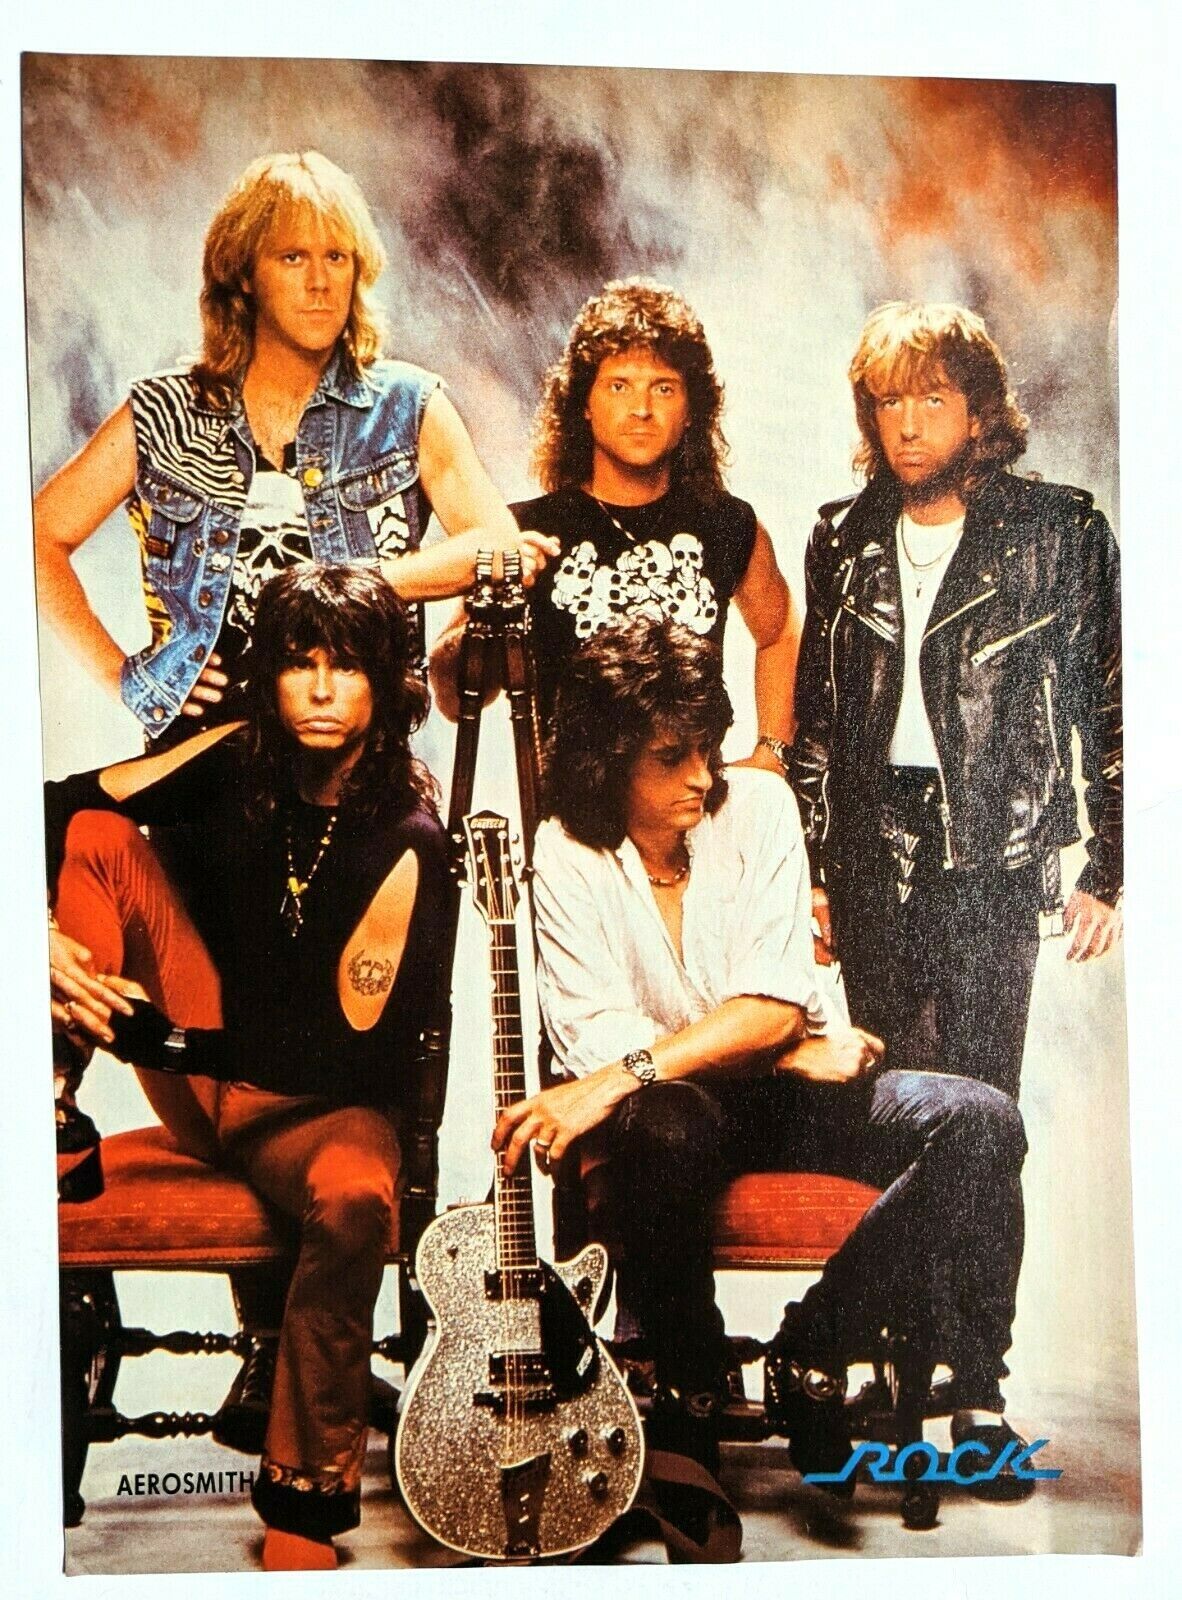 Aerosmith / Steven Tyler / Band Magazine Full Page Pinup Poster Clipping (5)